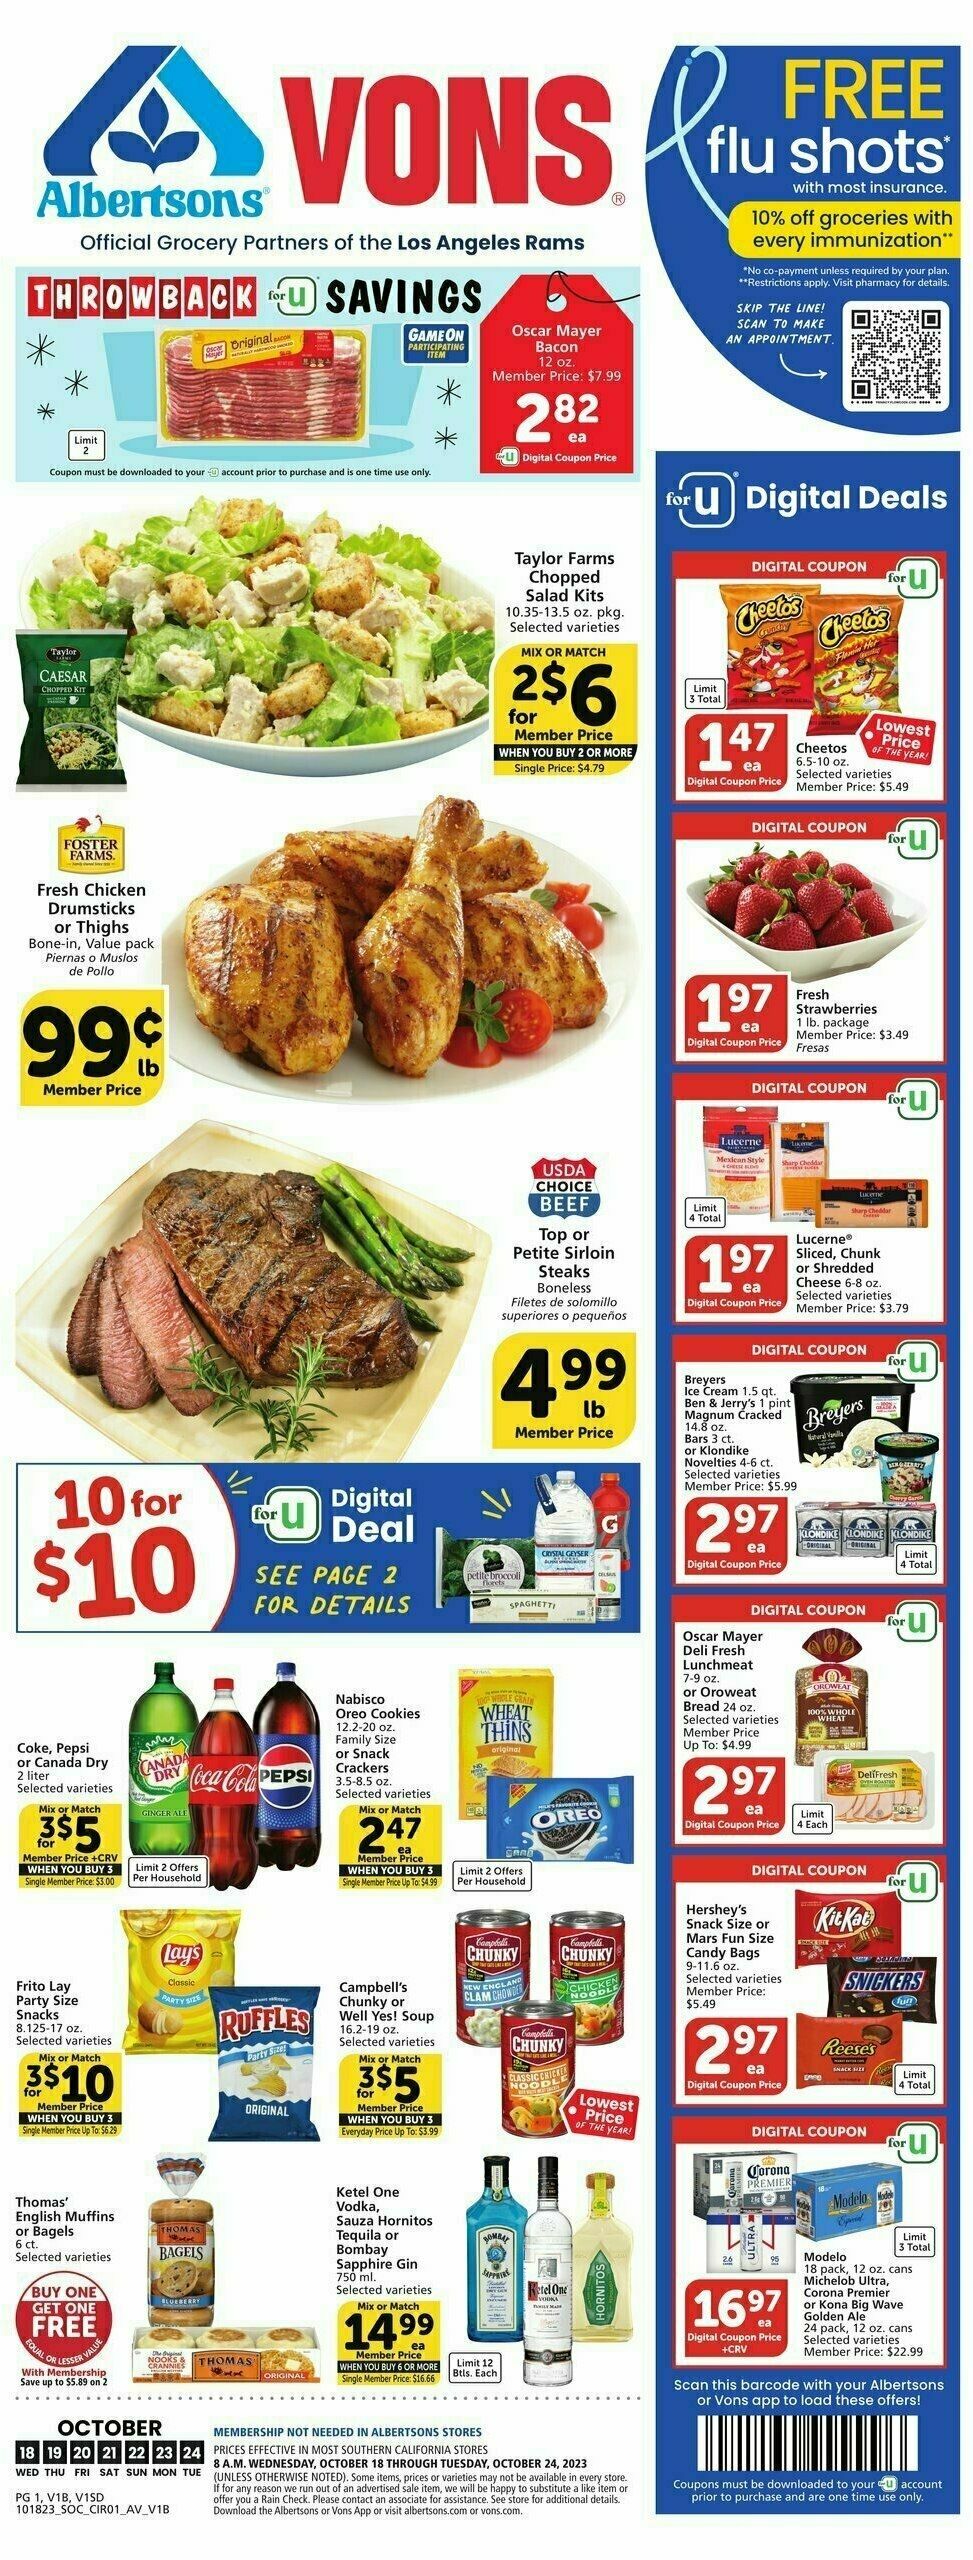 Vons Weekly Ad from October 18